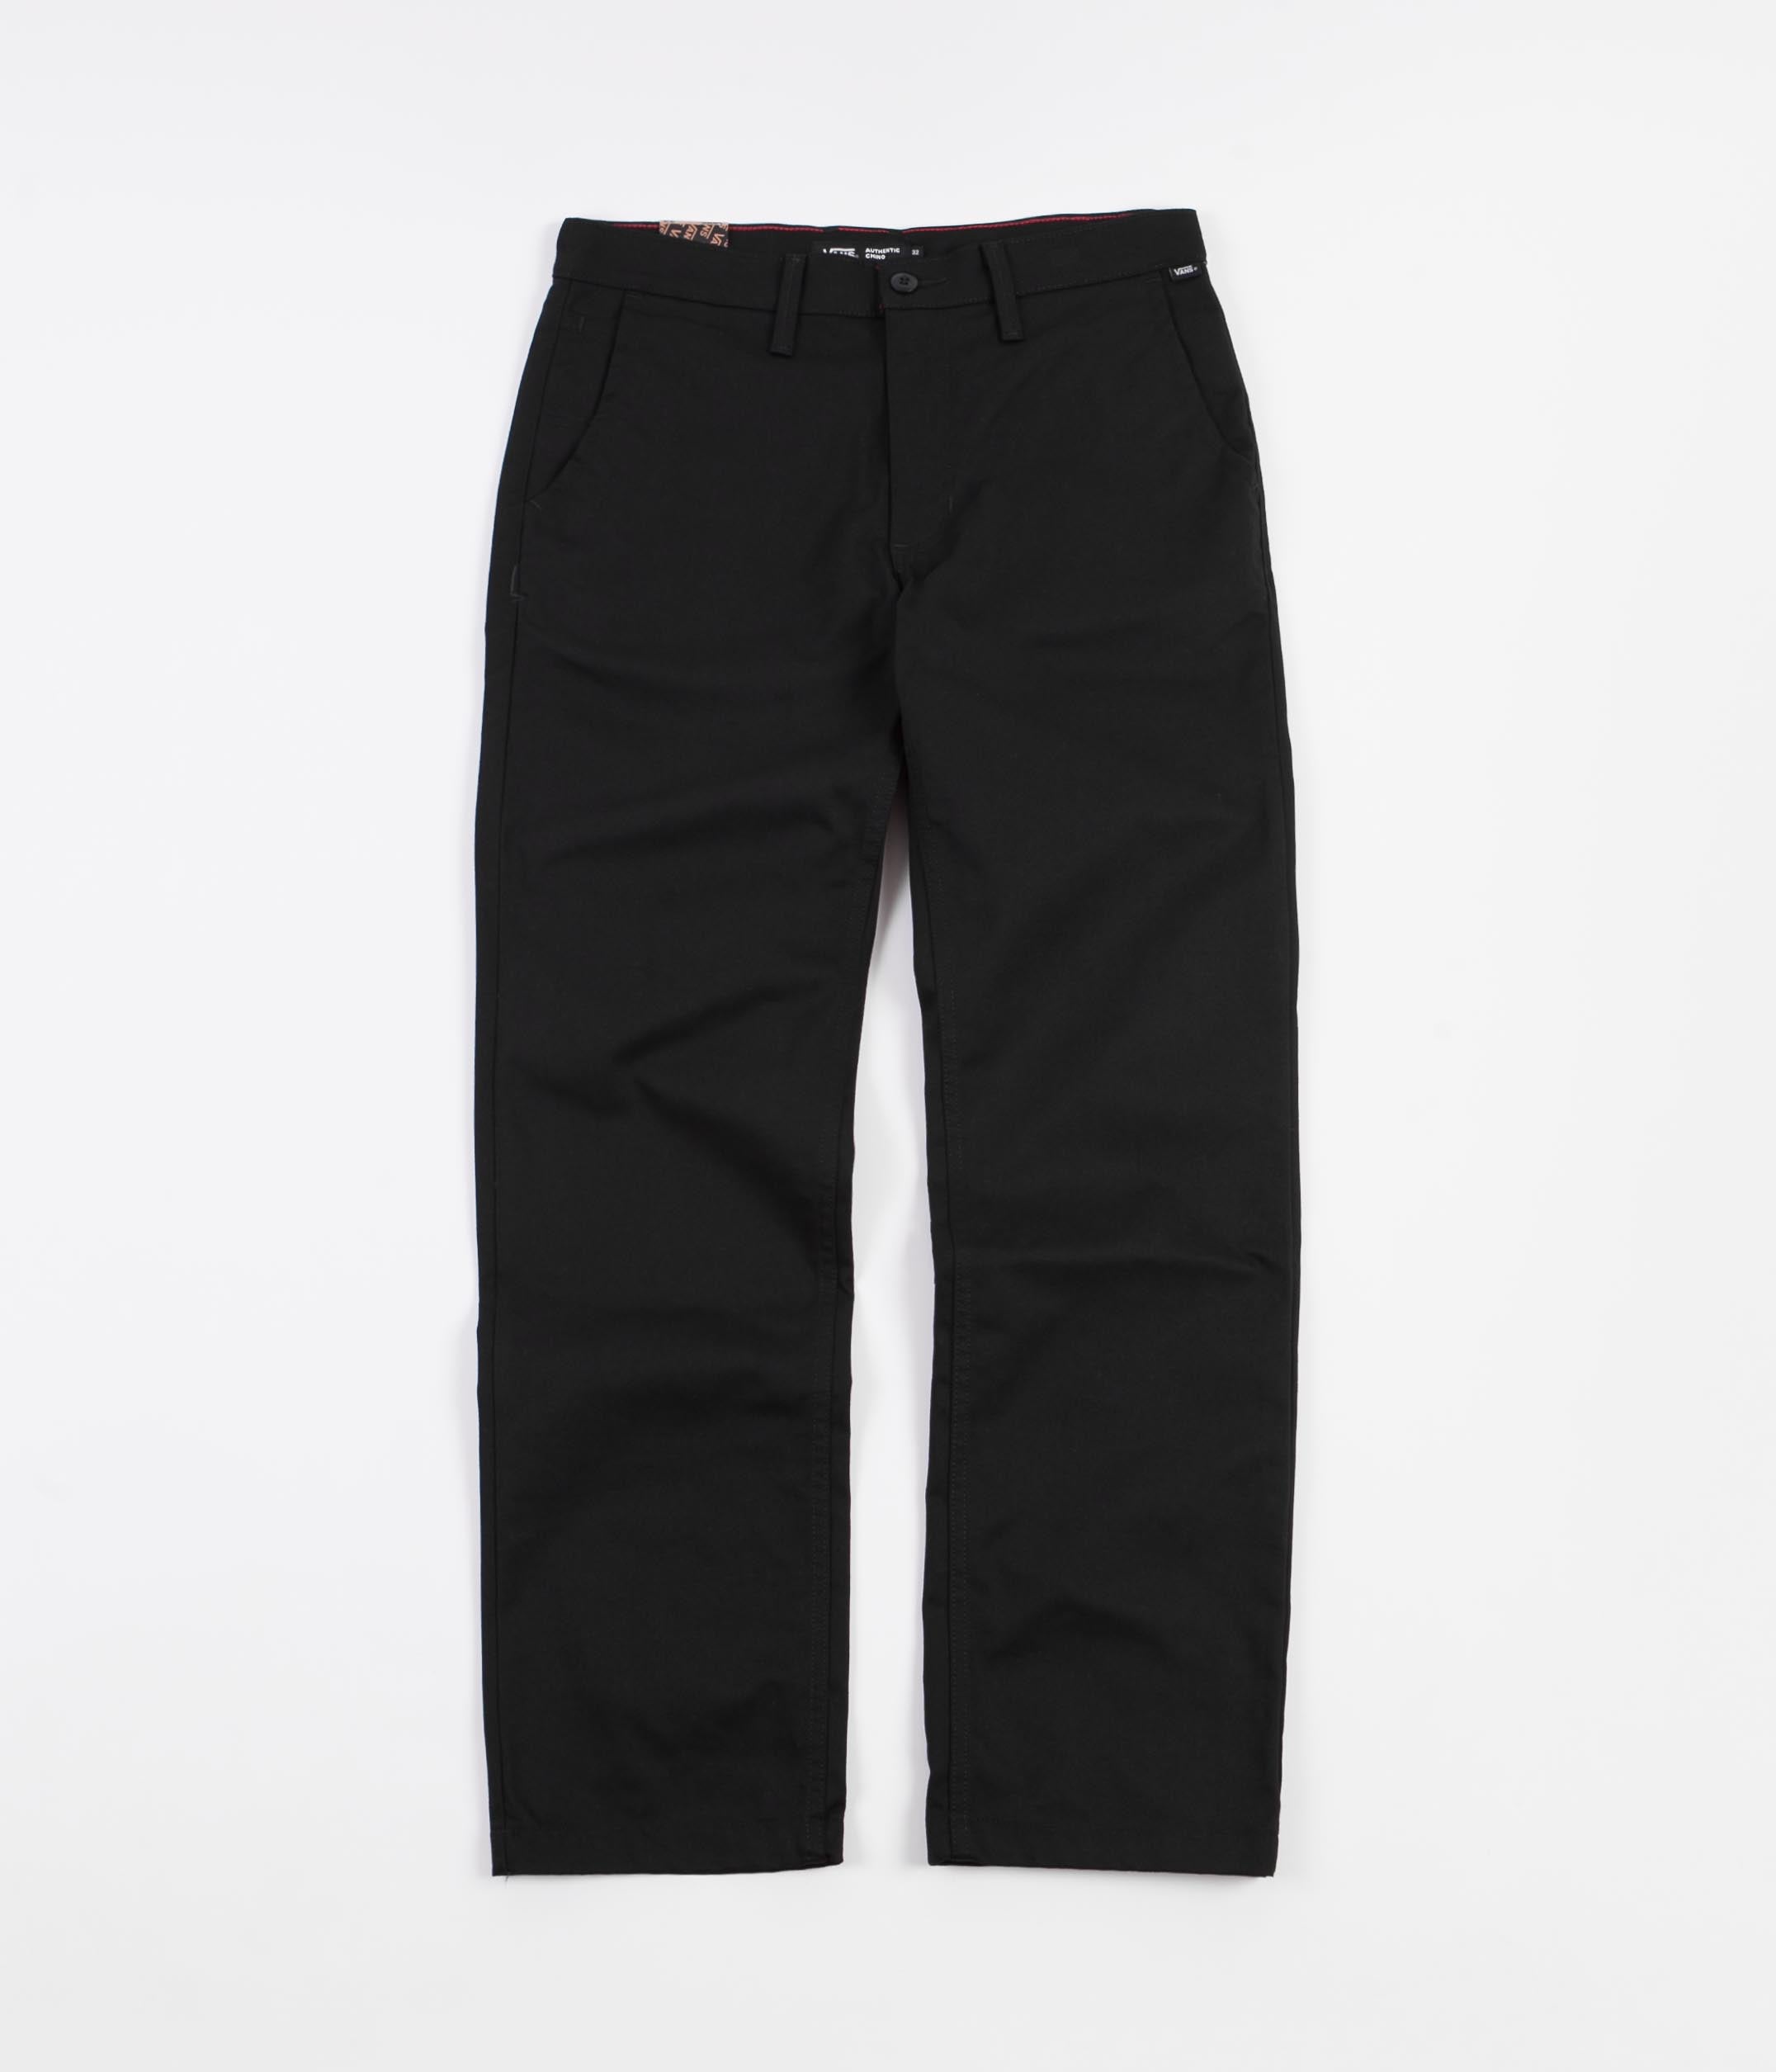 Vans Authentic Relaxed Chino Trousers - Black | Flatspot